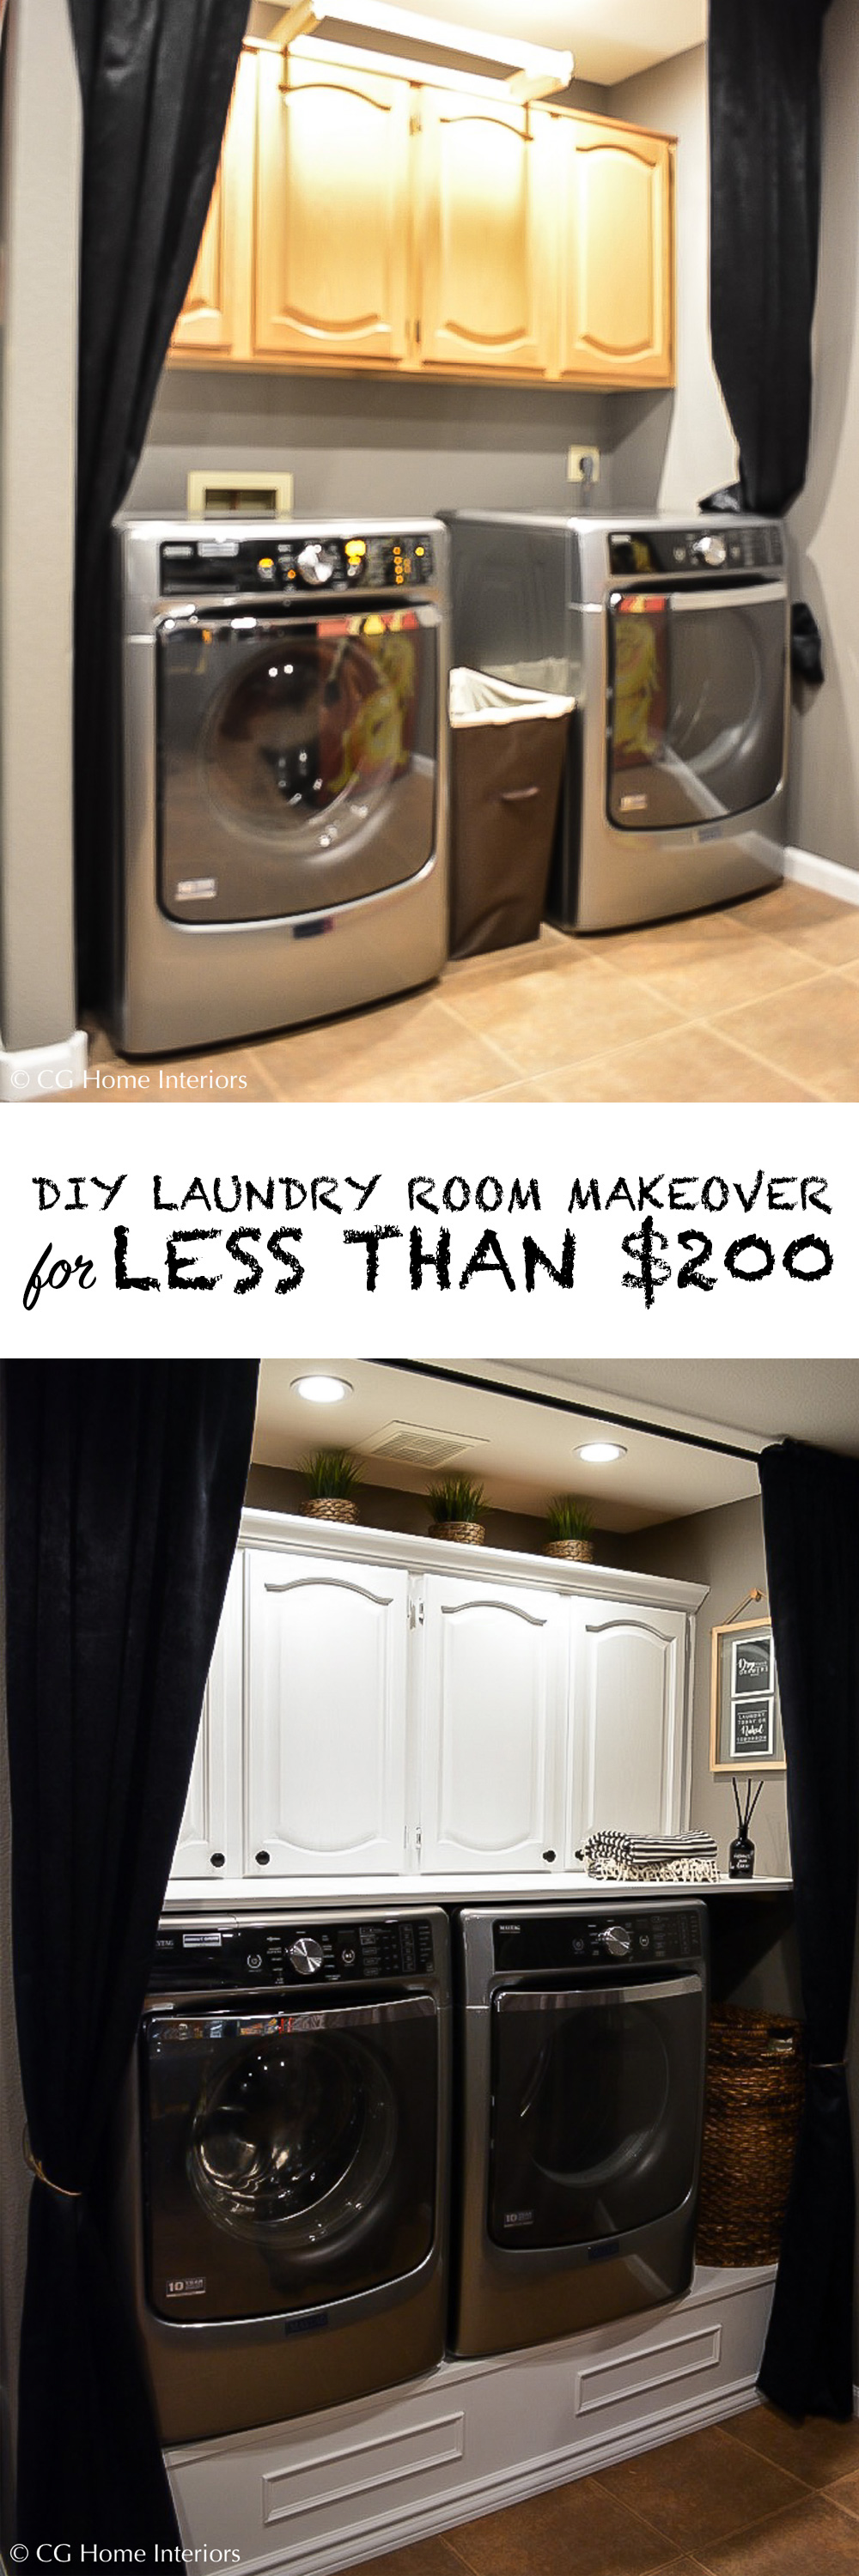 Pinterest Image Small Laundry Room Makeover on a Budget